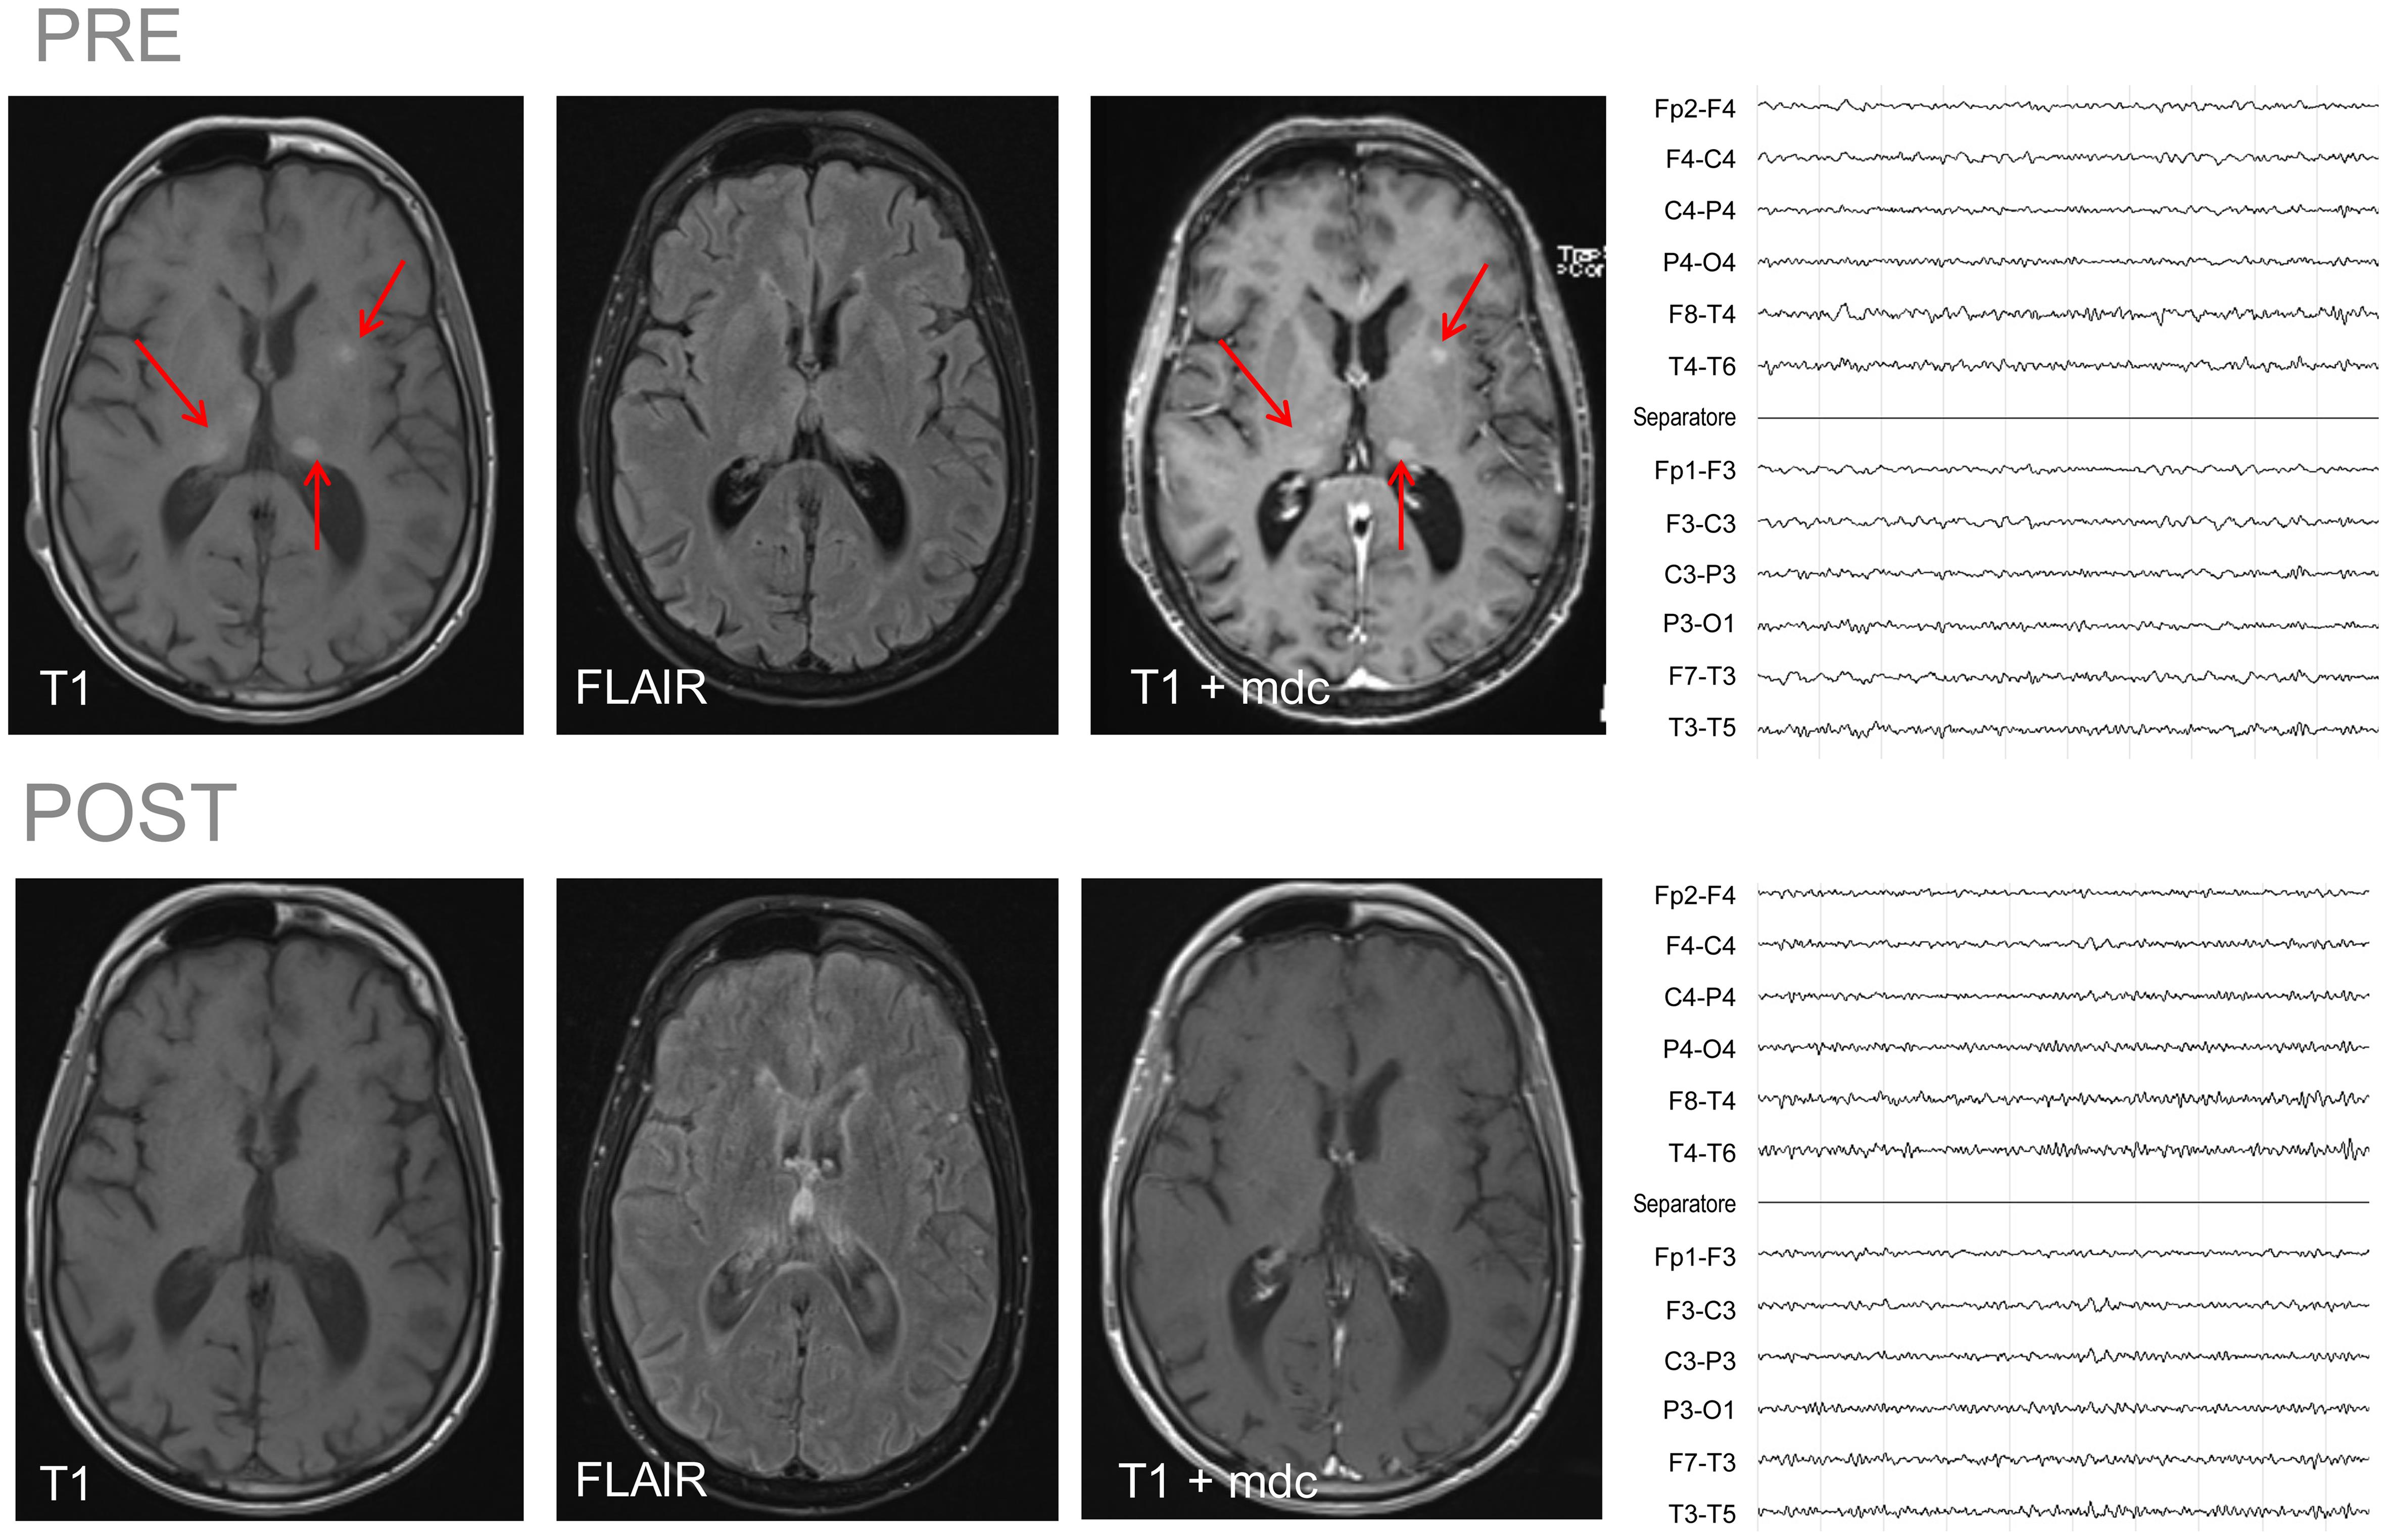 Brain magnetic resonance images with and without contrast medium (mdc) before (PRE; December 2020, upper photo) and after osimertinib therapy (POST; February 2022, lower photo), and electroencephalogram readings before (PRE; December 2020, upper photo) and after osimertinib therapy (POST; March 2022, lower photo).